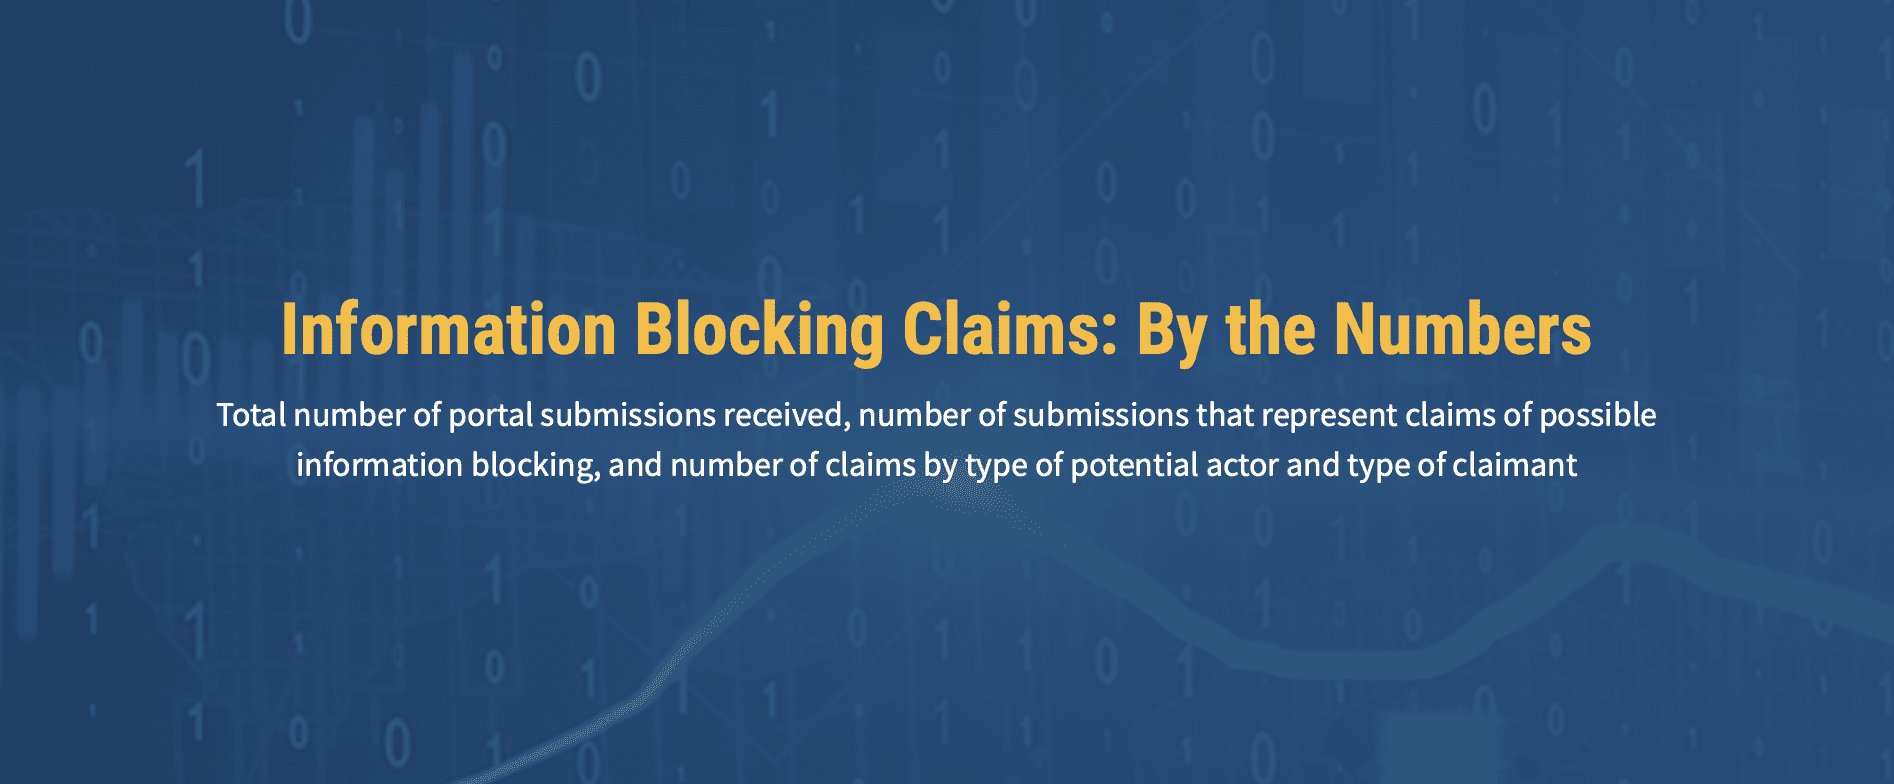 ONC Releases Data on Information Blocking Claims